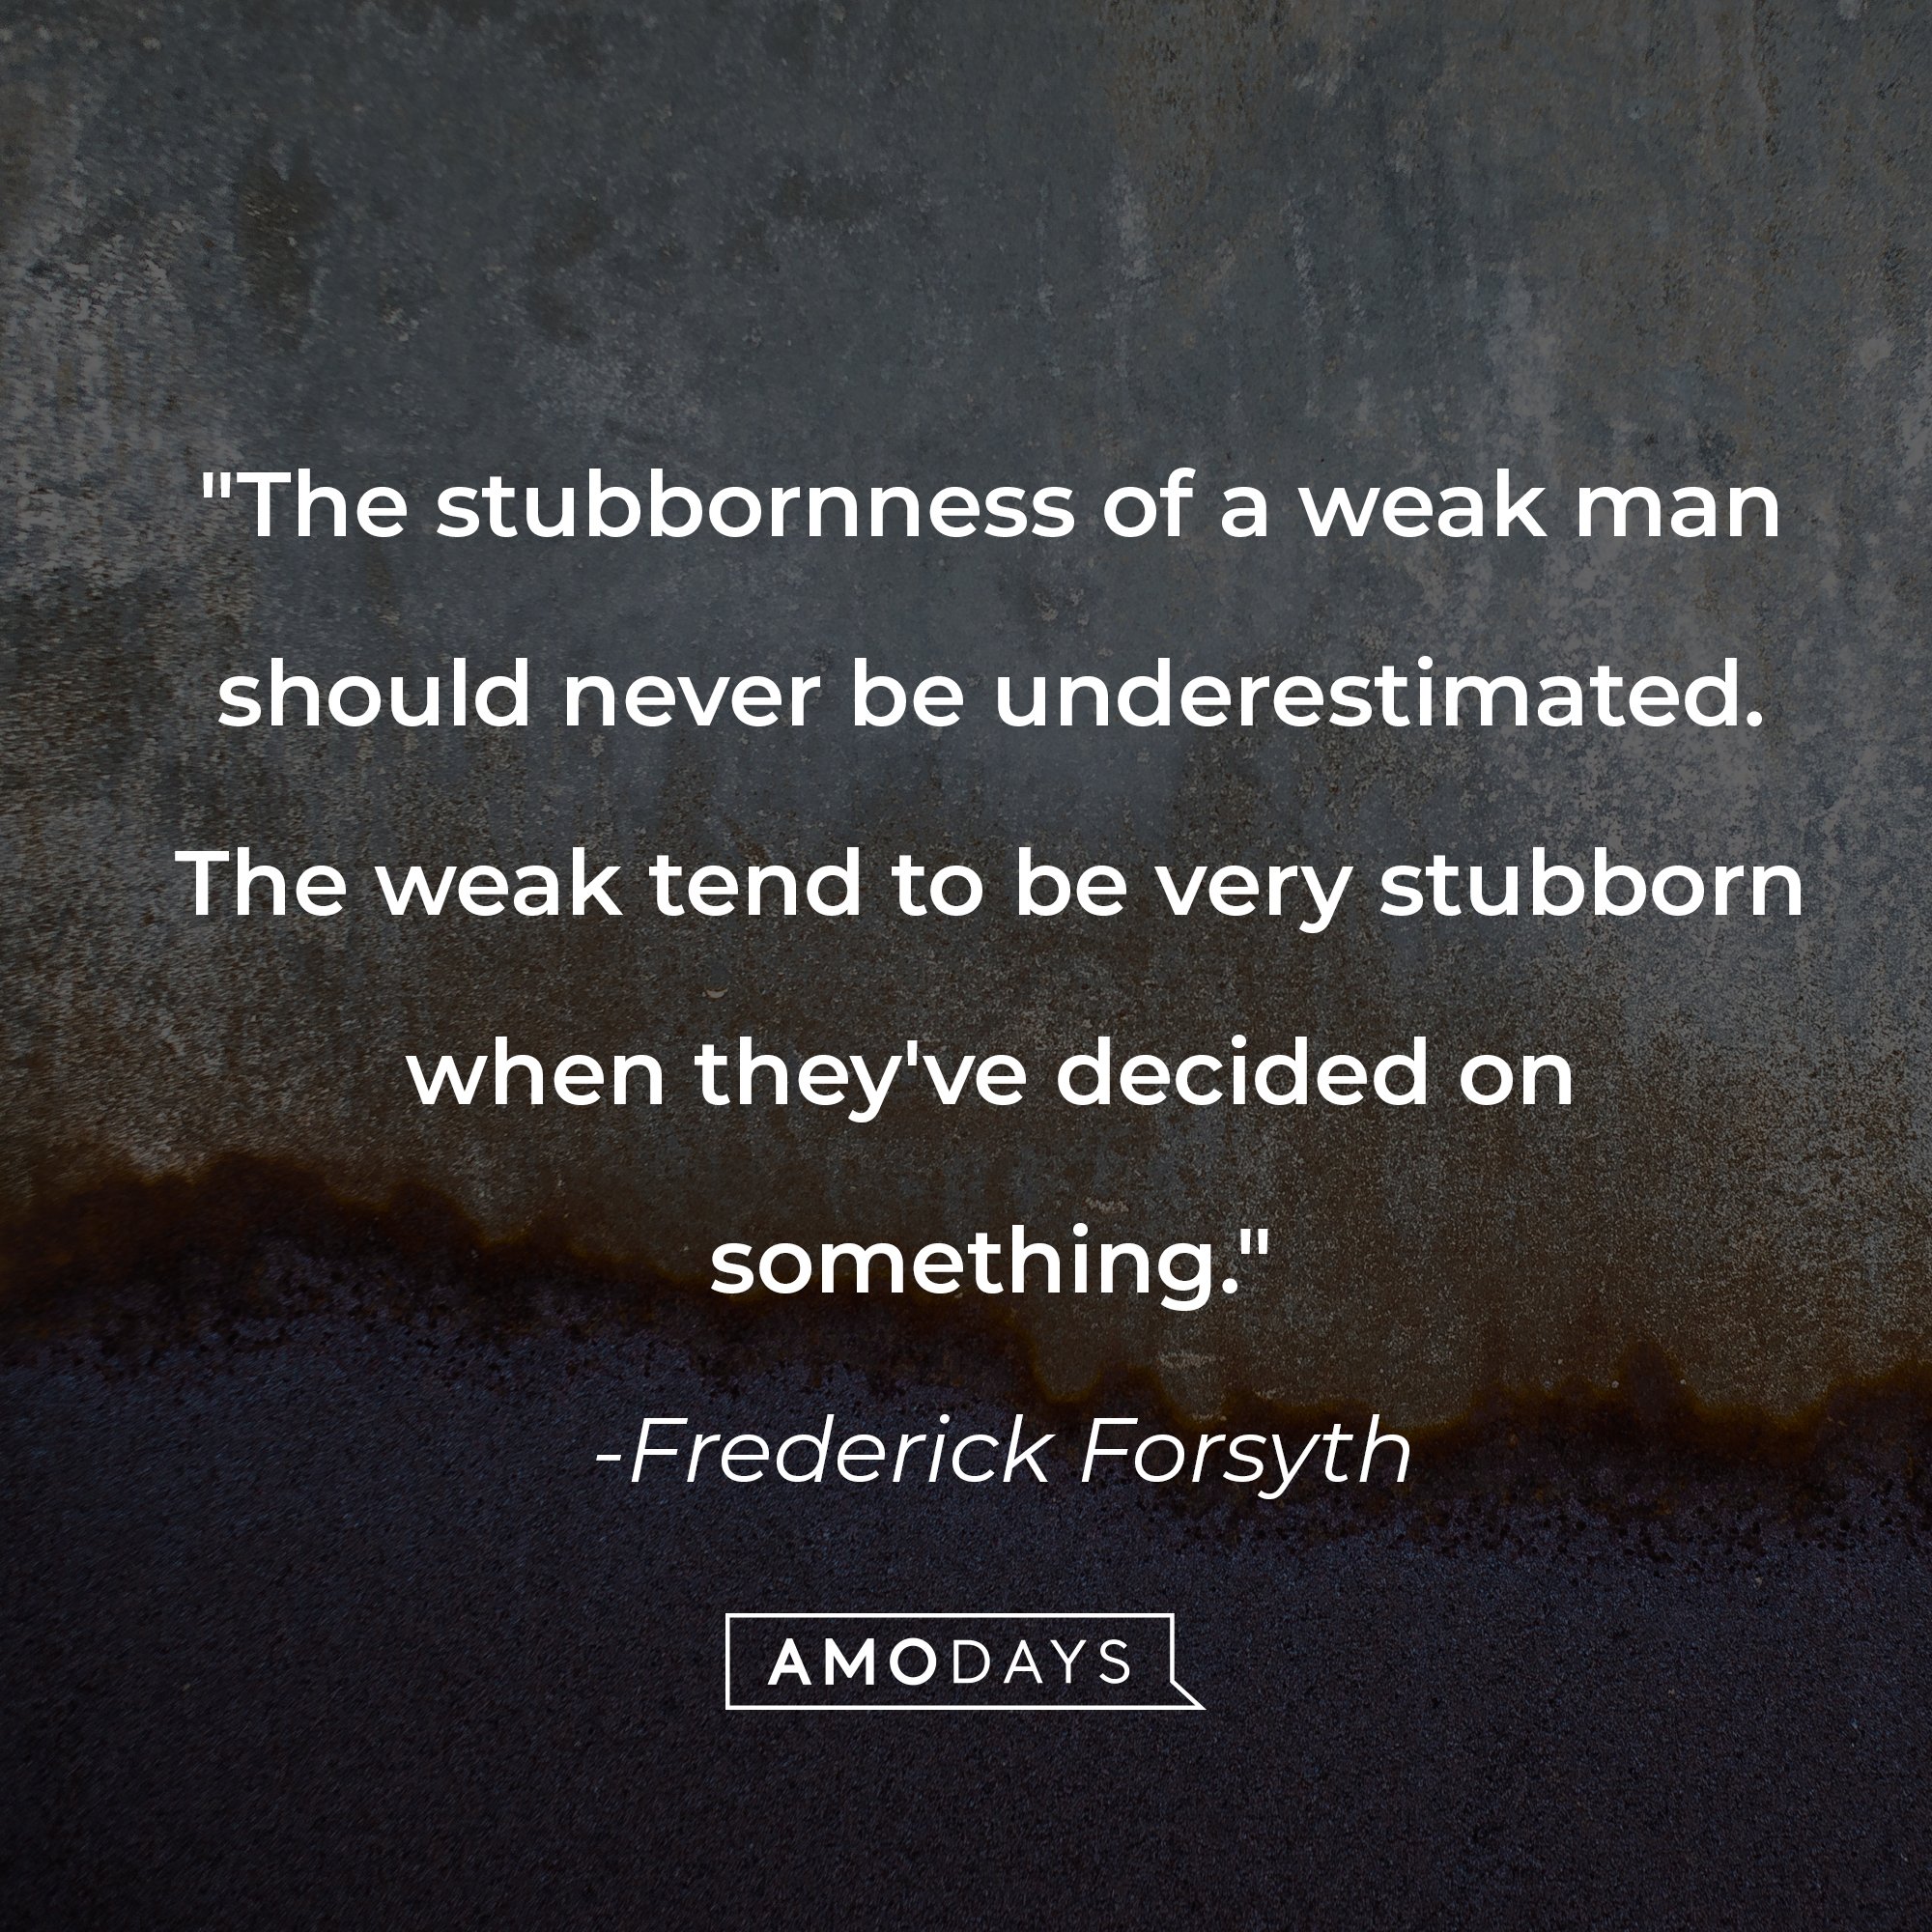 Frederick Forsyth's quote: "The stubbornness of a weak man should never be underestimated. The weak tend to be very stubborn when they've decided on something." | Image: AmoDays